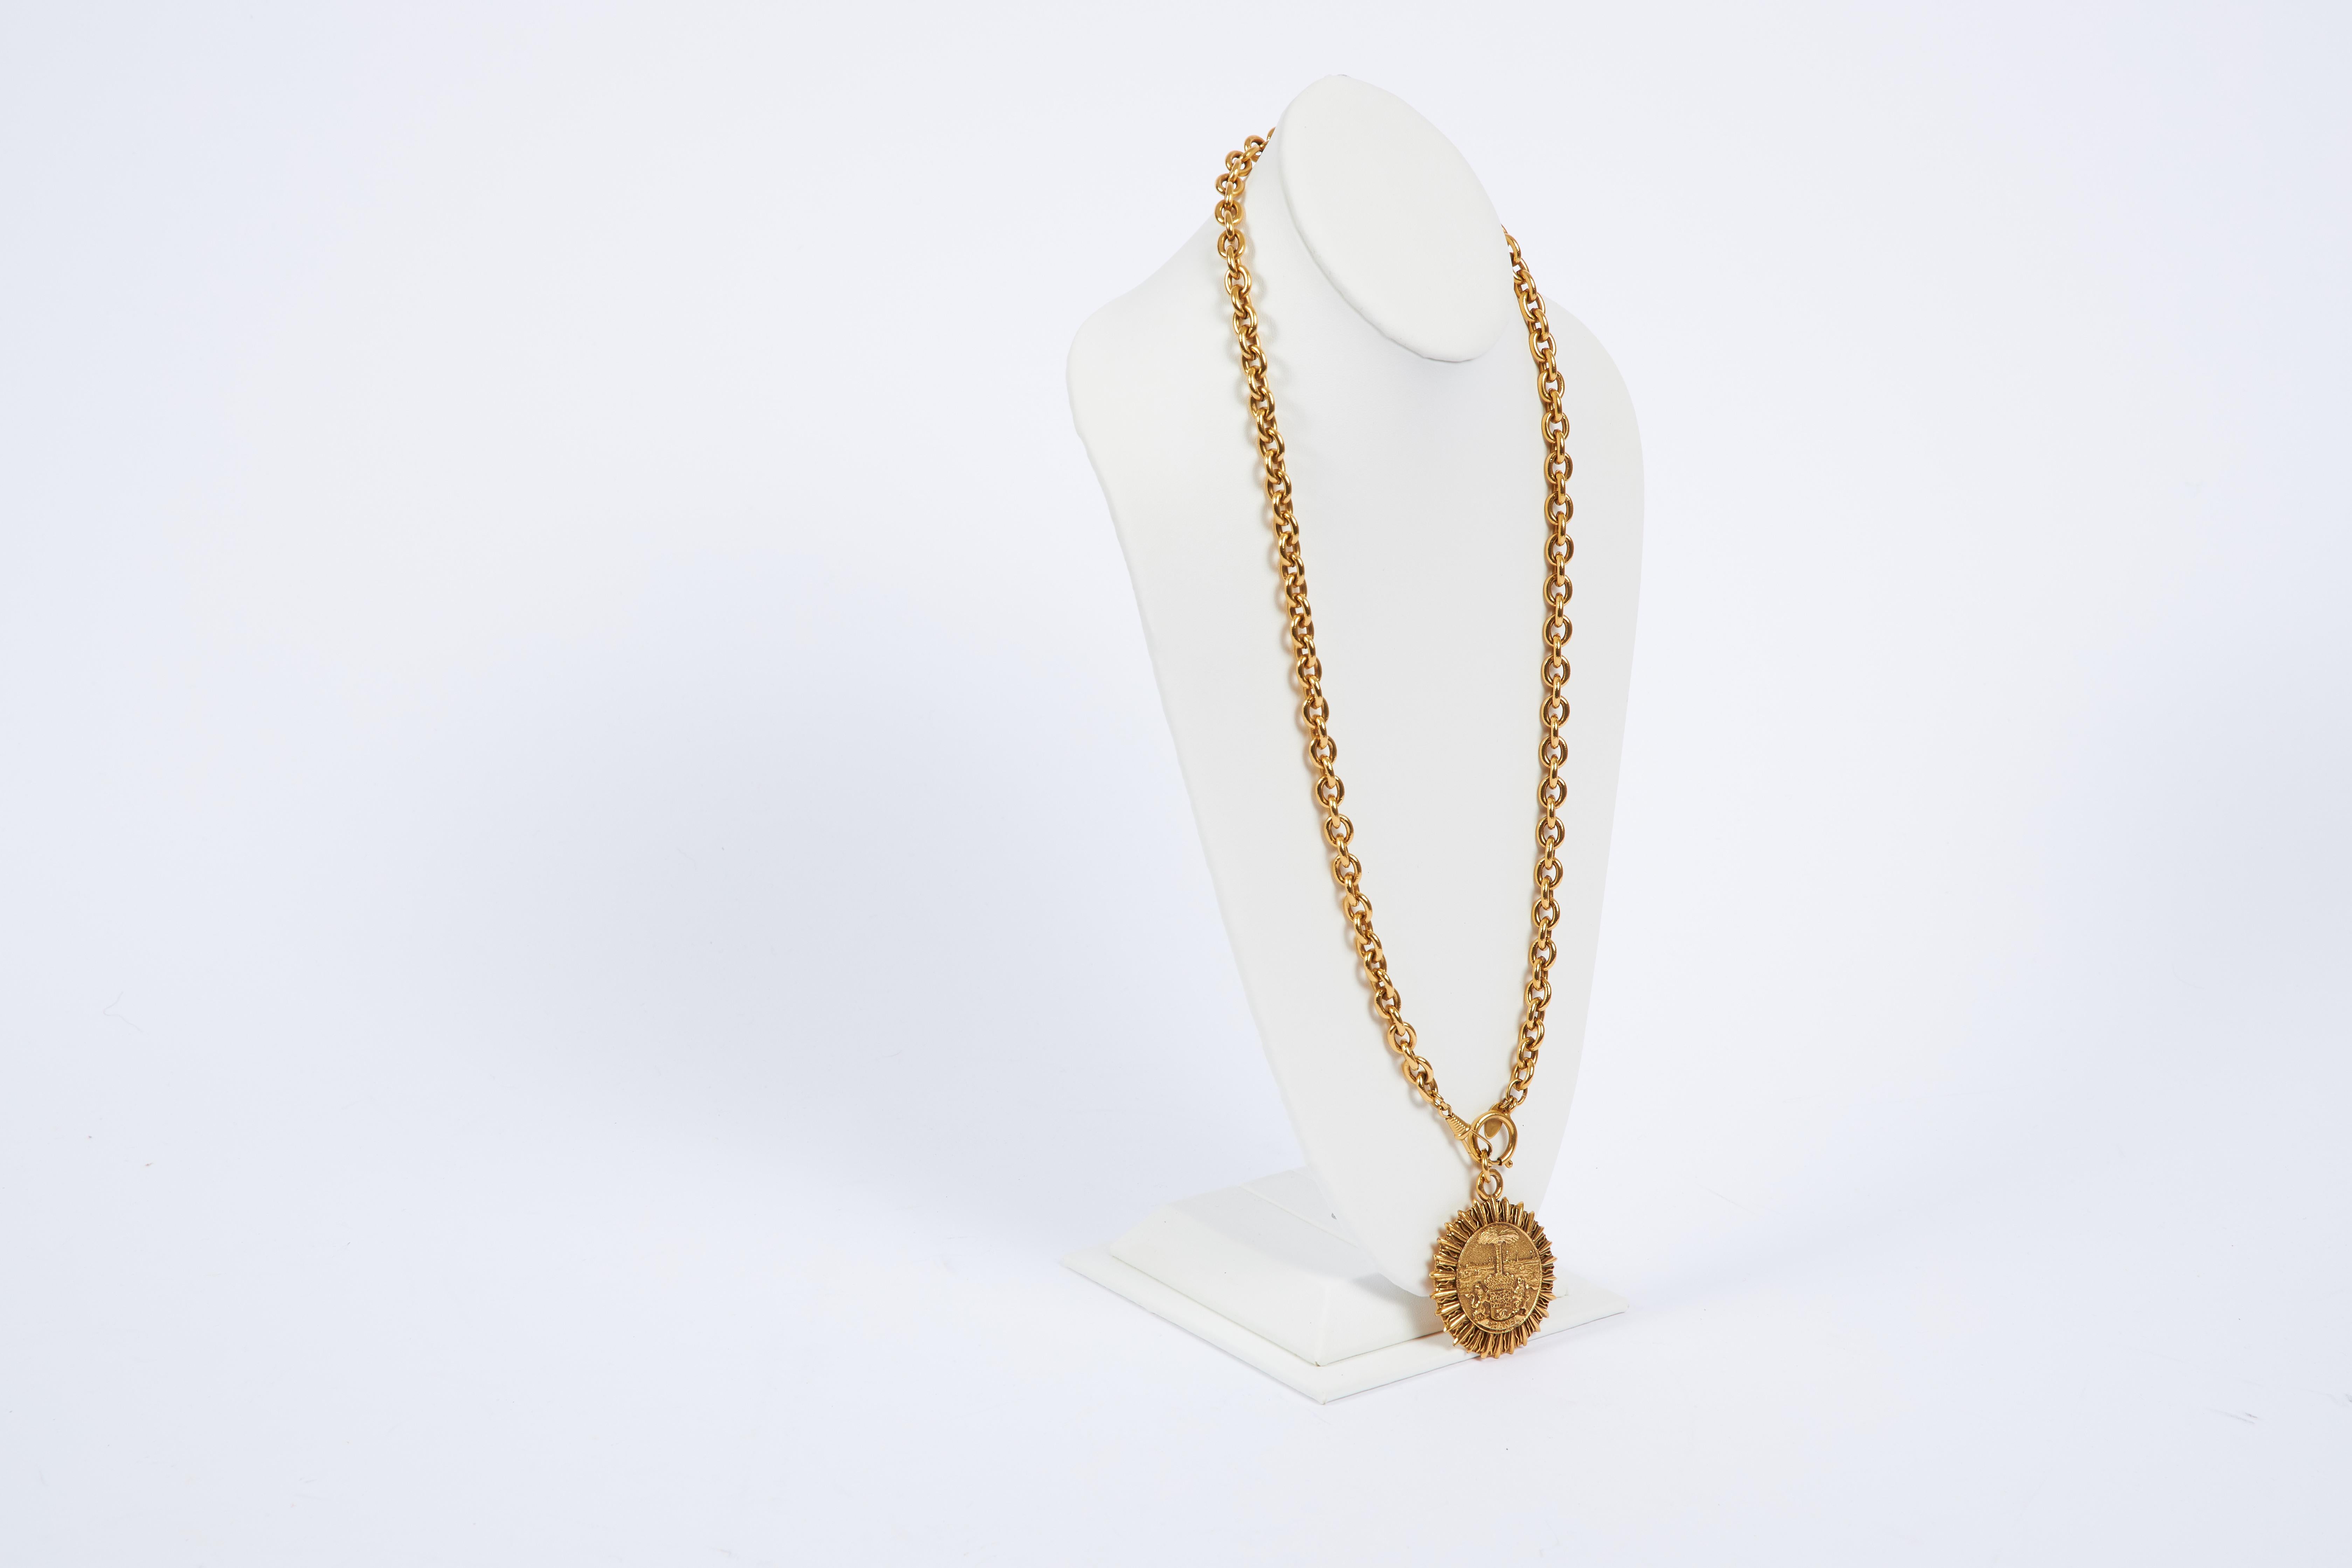 1980s Chanel gold tone metal sun tarot pendant necklace. Comes with original pouch or box.